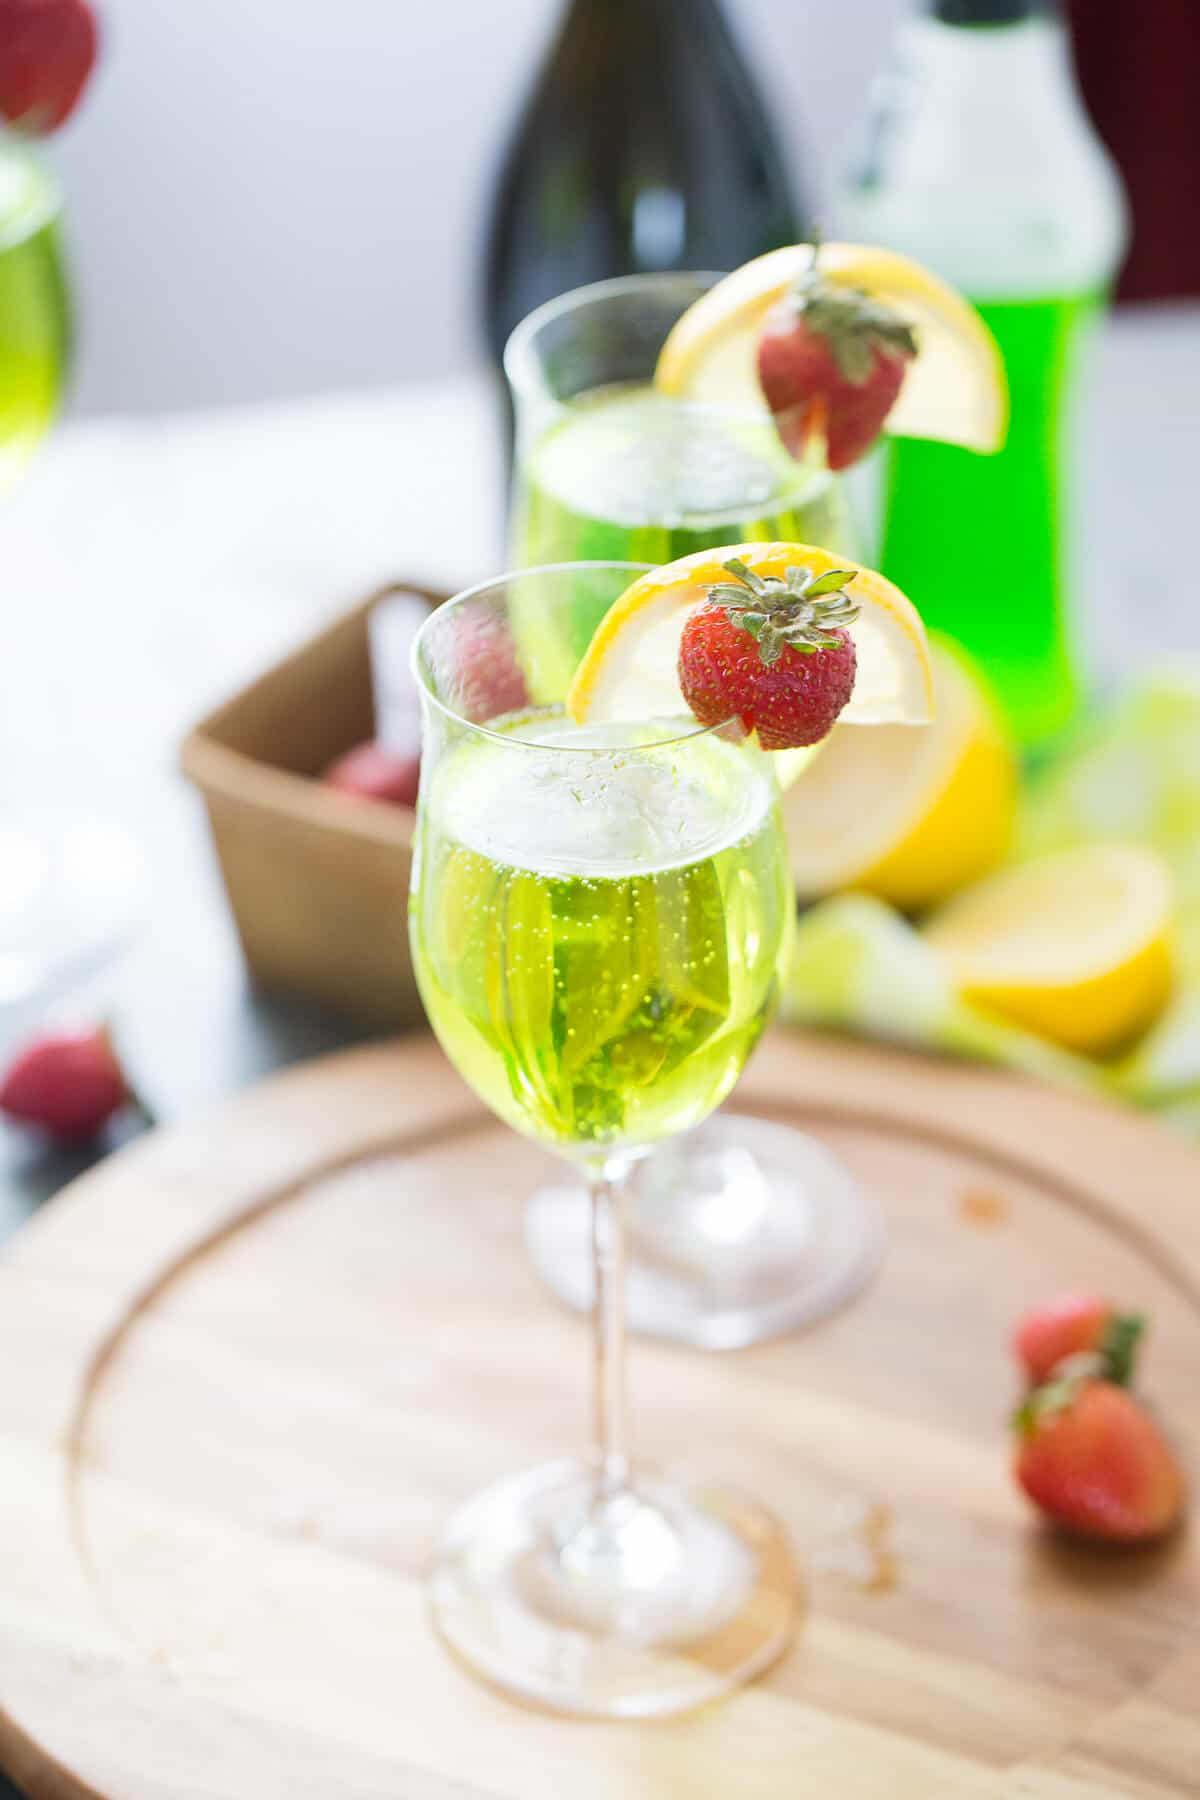 This bubbly Irish cocktail is so much fun! Prosecco and Midori make an unforgettable combination!